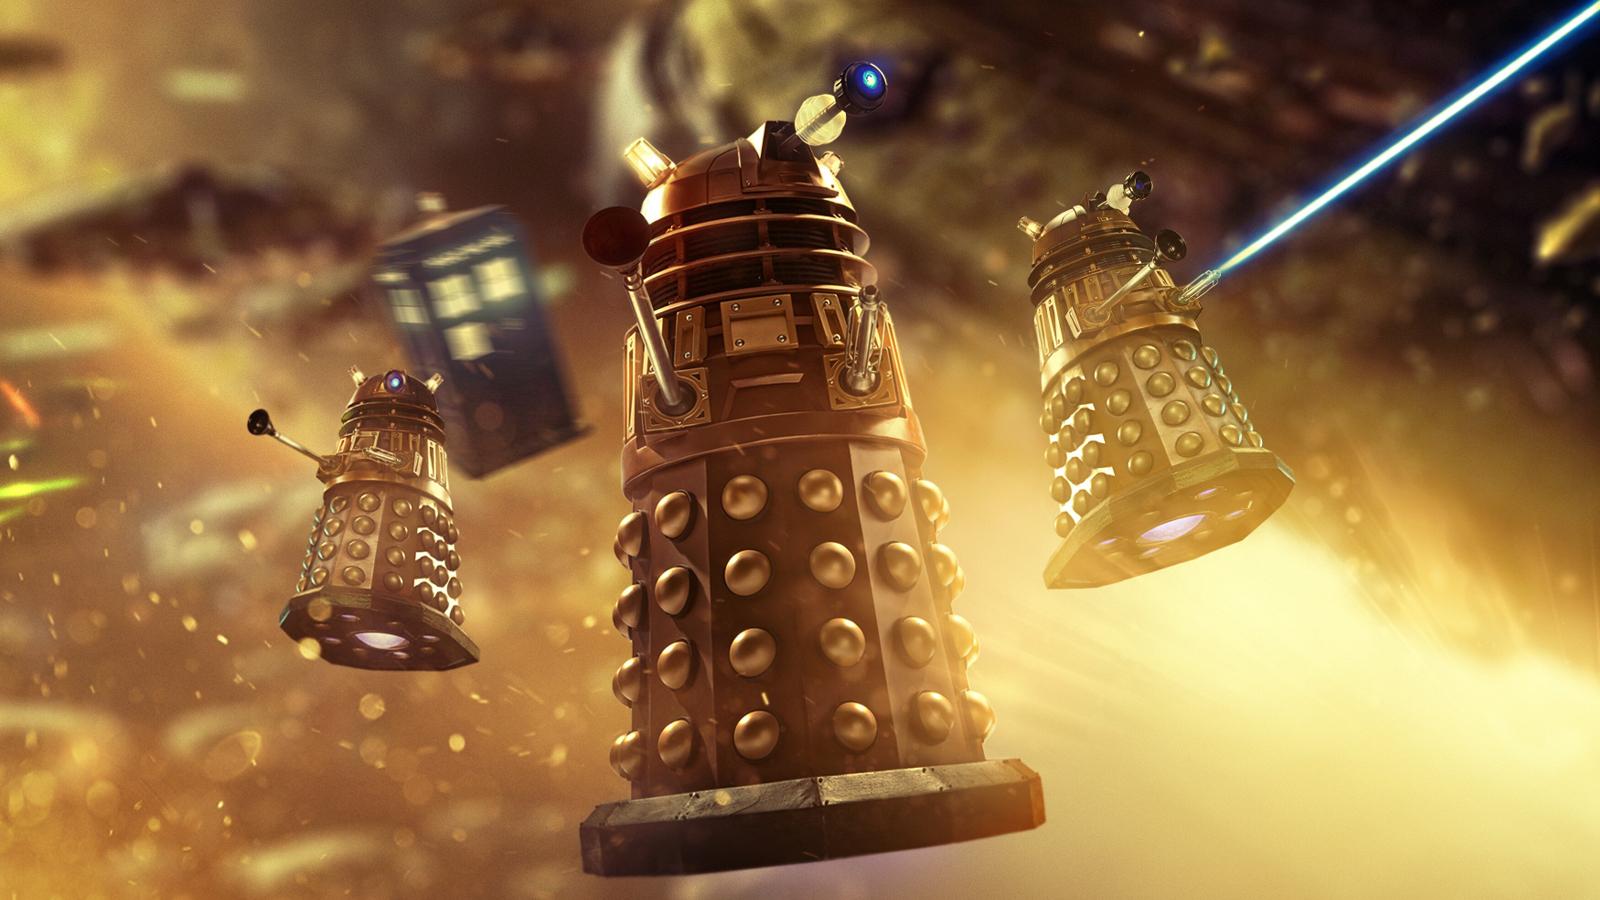 Daleks flying away from the TARDIS in a Doctor Who publicity image